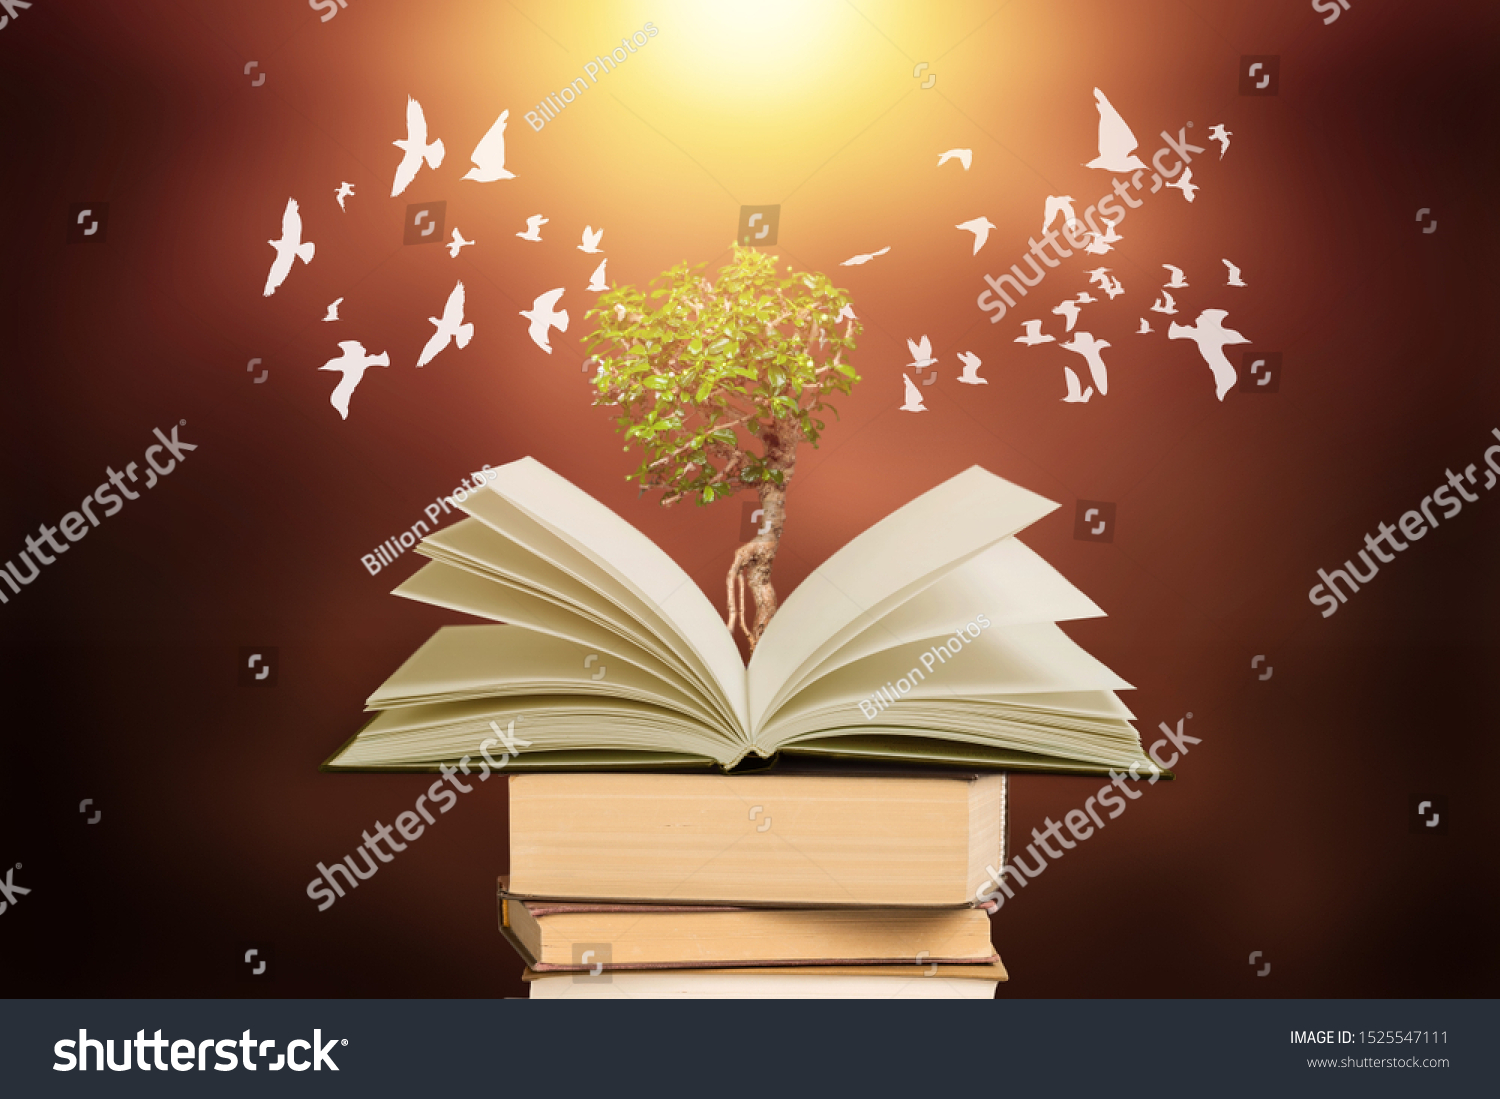 Education concept The growth of knowledge is represented by pictures of trees on the books, with birds flying around on that book. Is to lead the future of success #1525547111